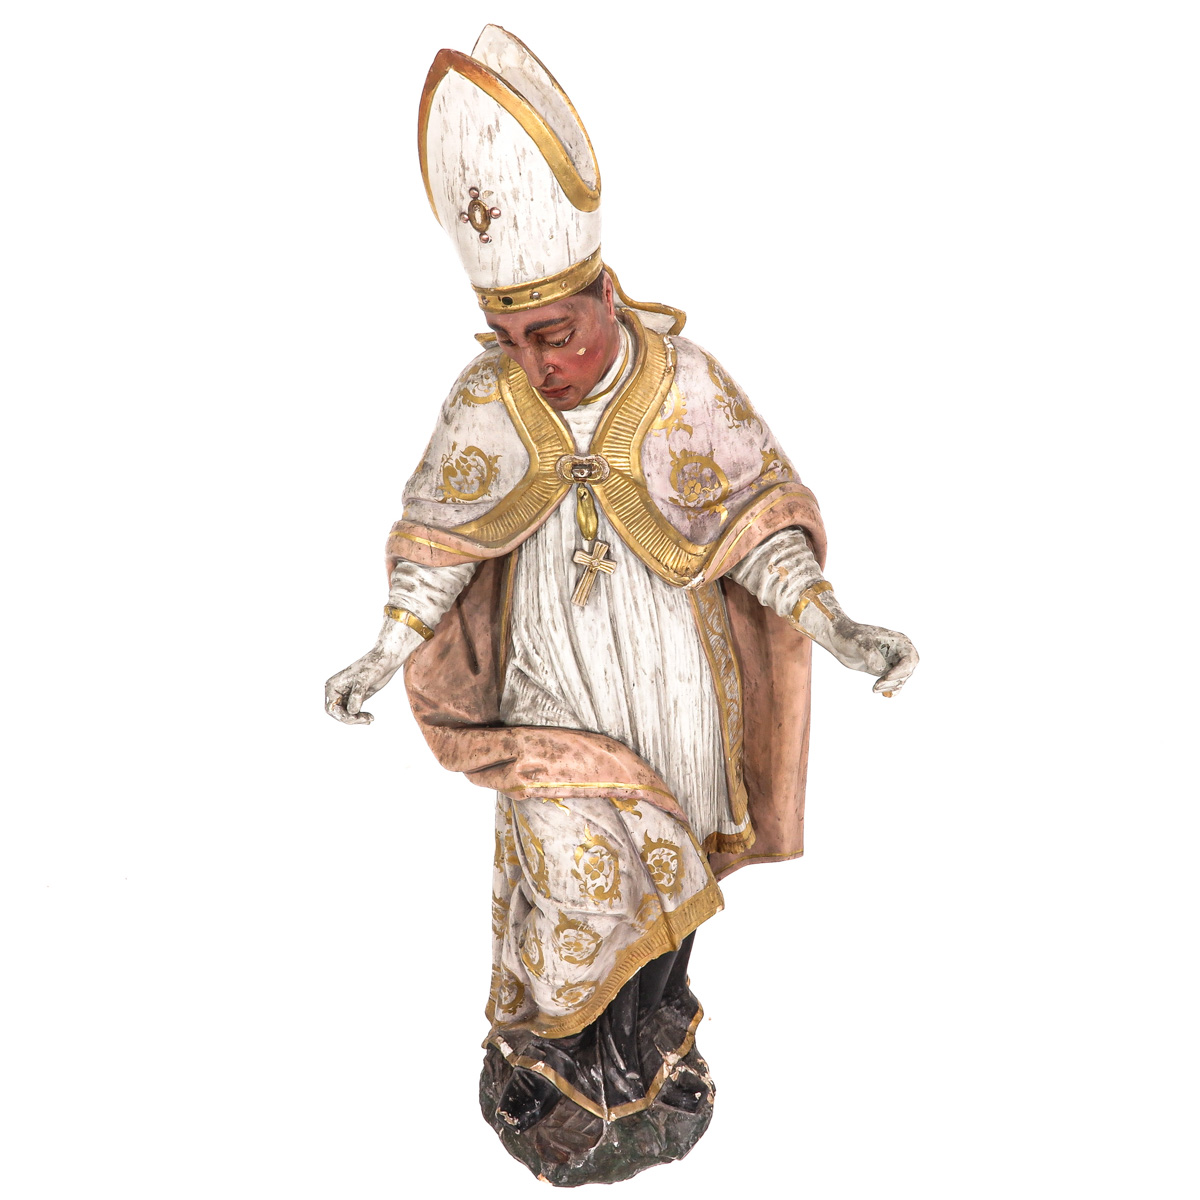 A Religious Wood Sculpture of a Pope - Image 5 of 10